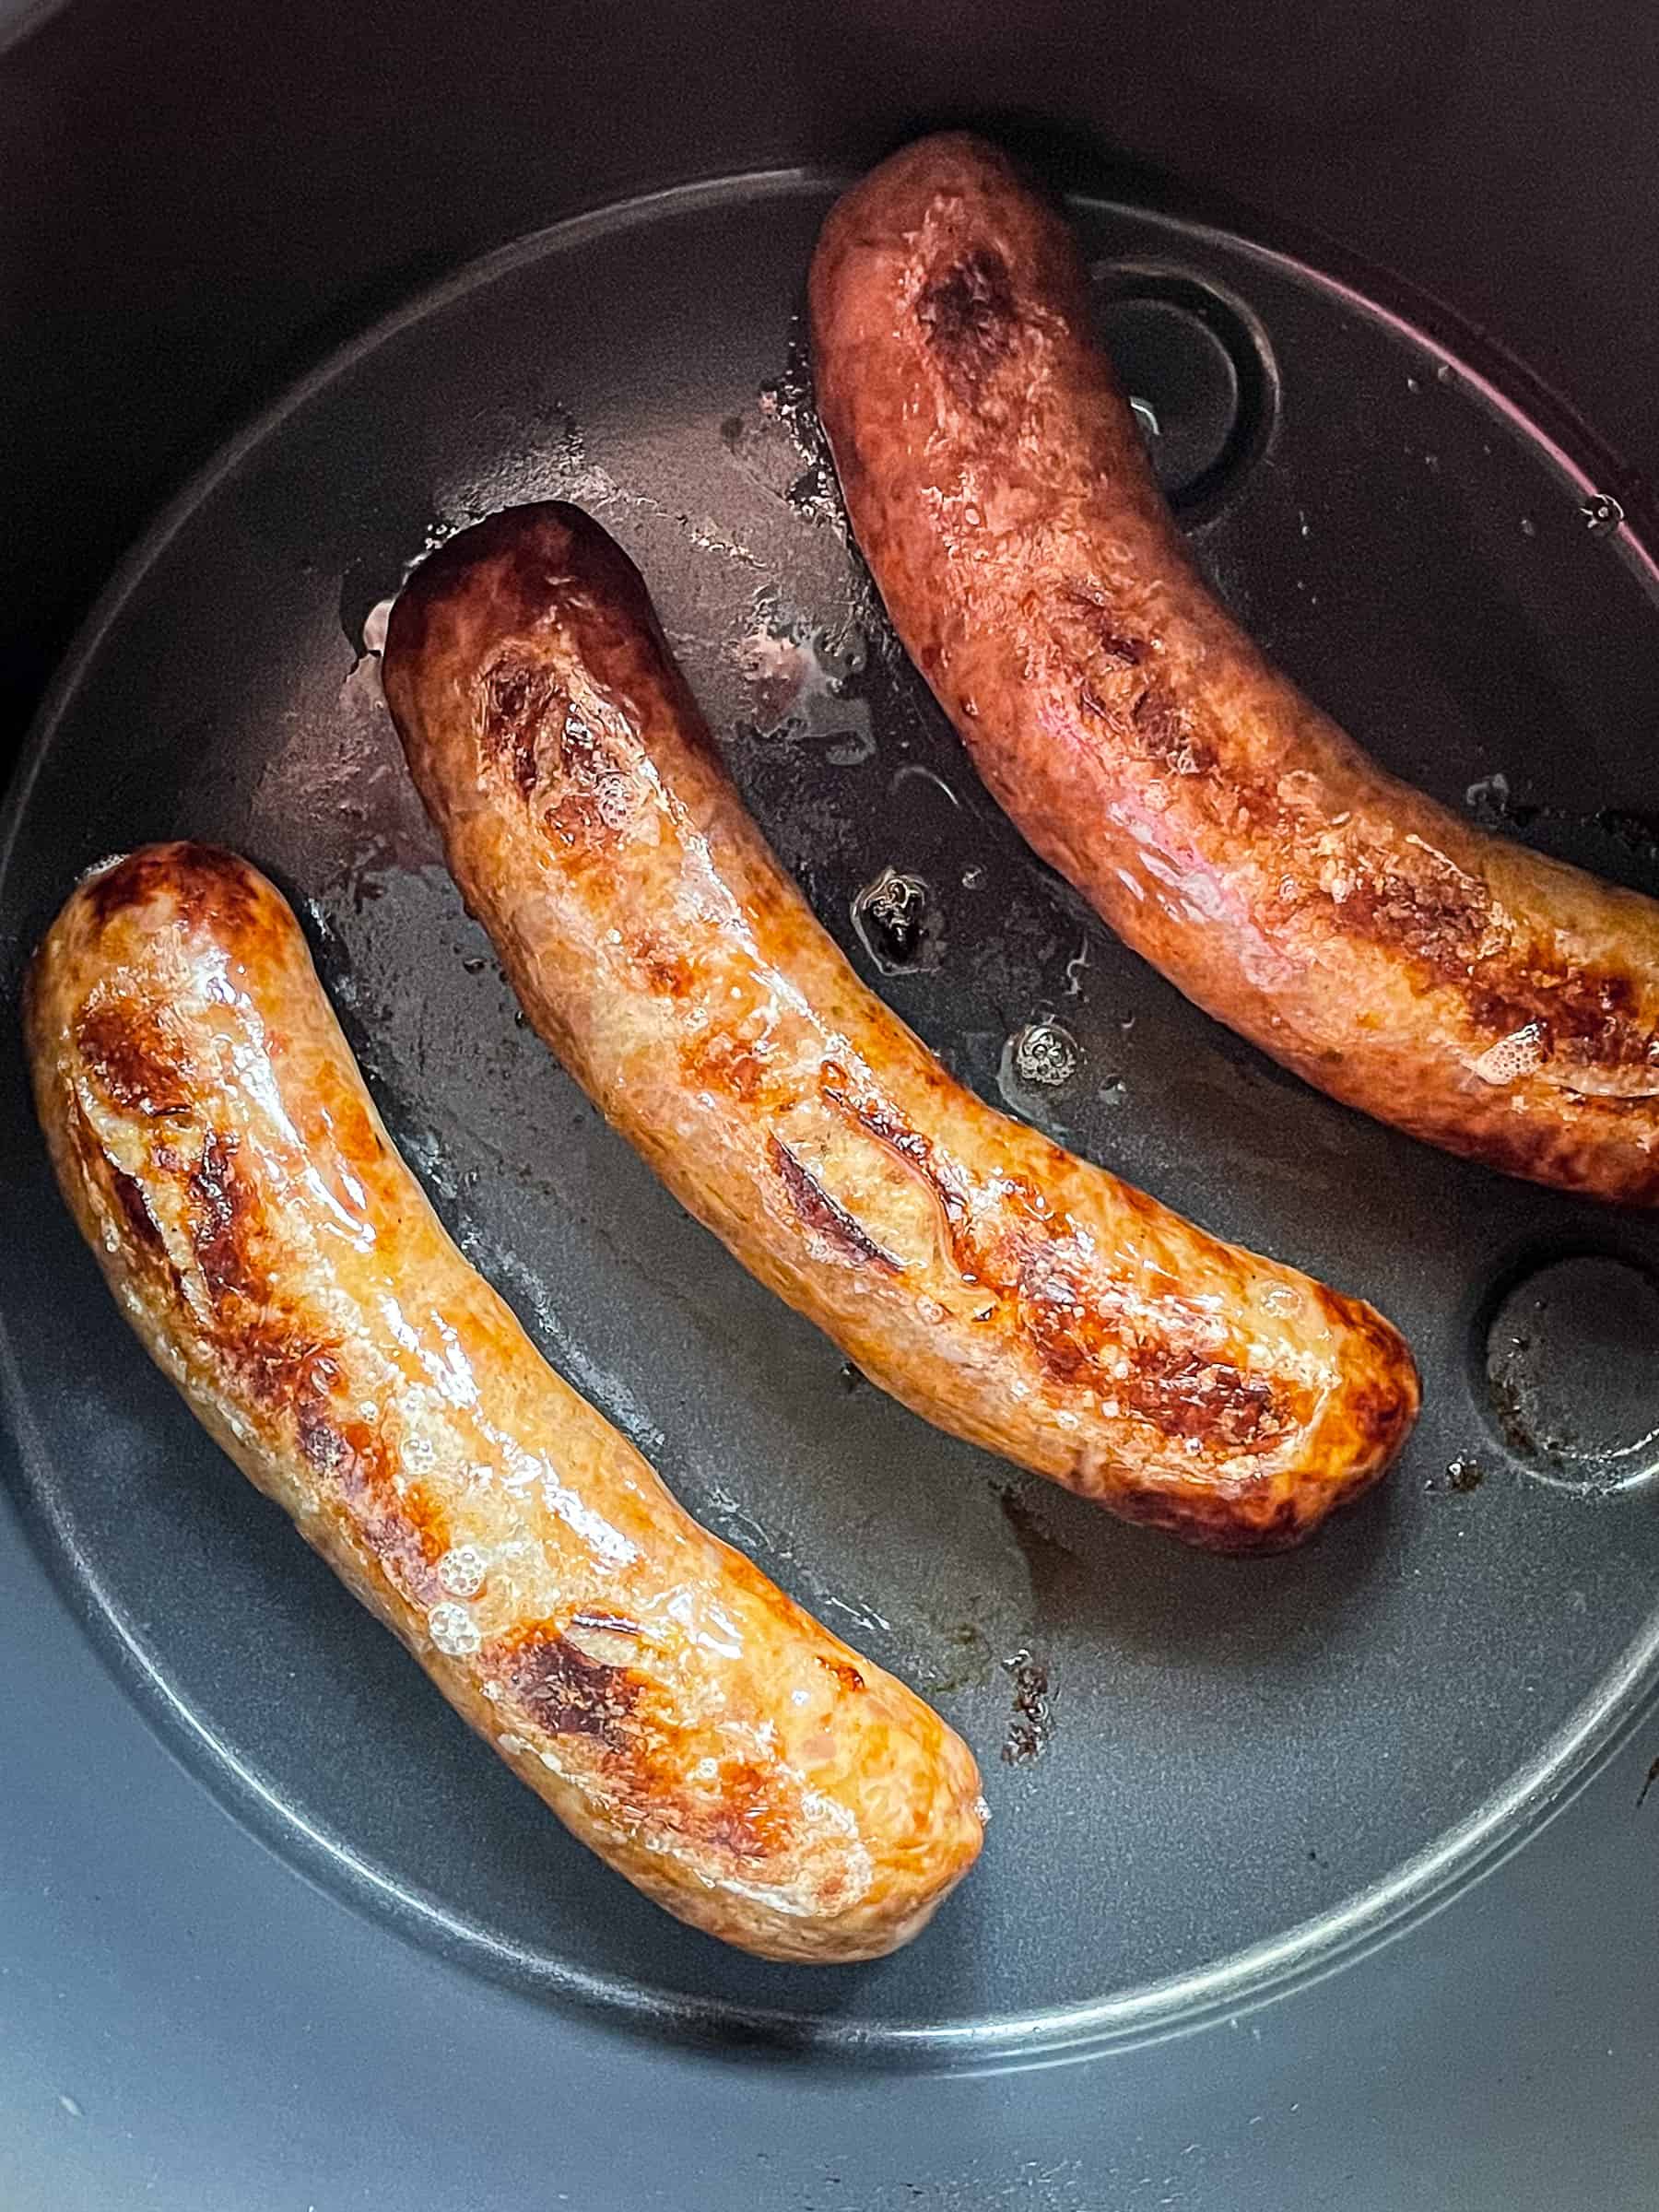 Cooked Italian sausage in the air fryer.